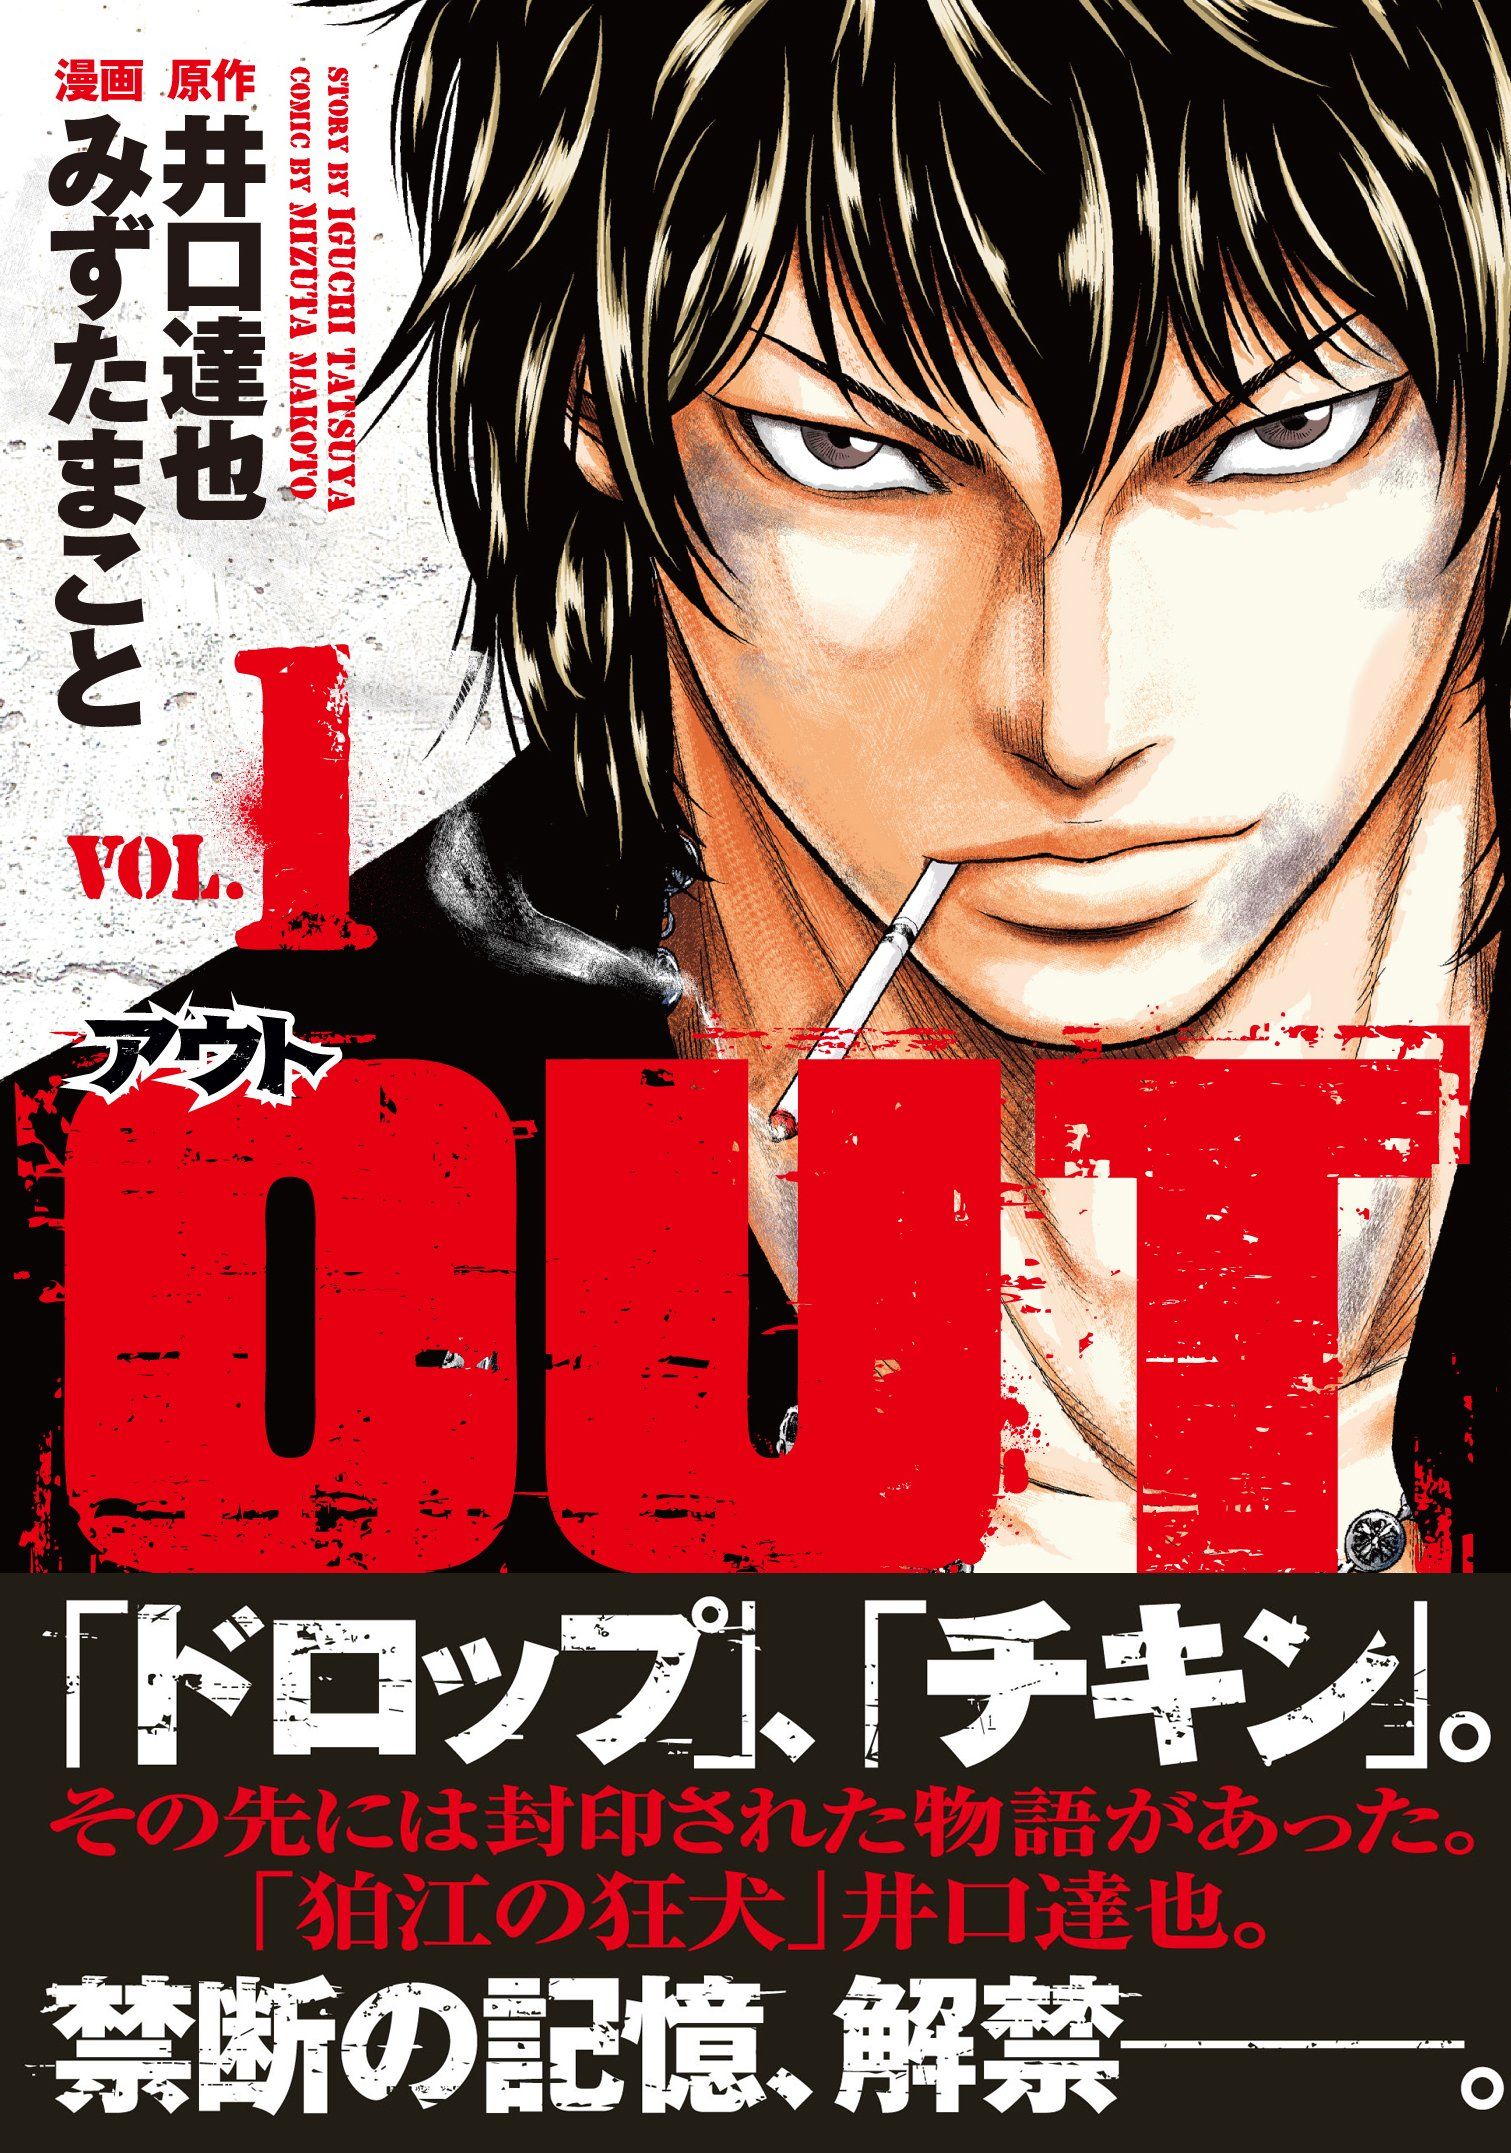 Underrated Delinquent Manga is the Best Series More Fans Should Be Reading